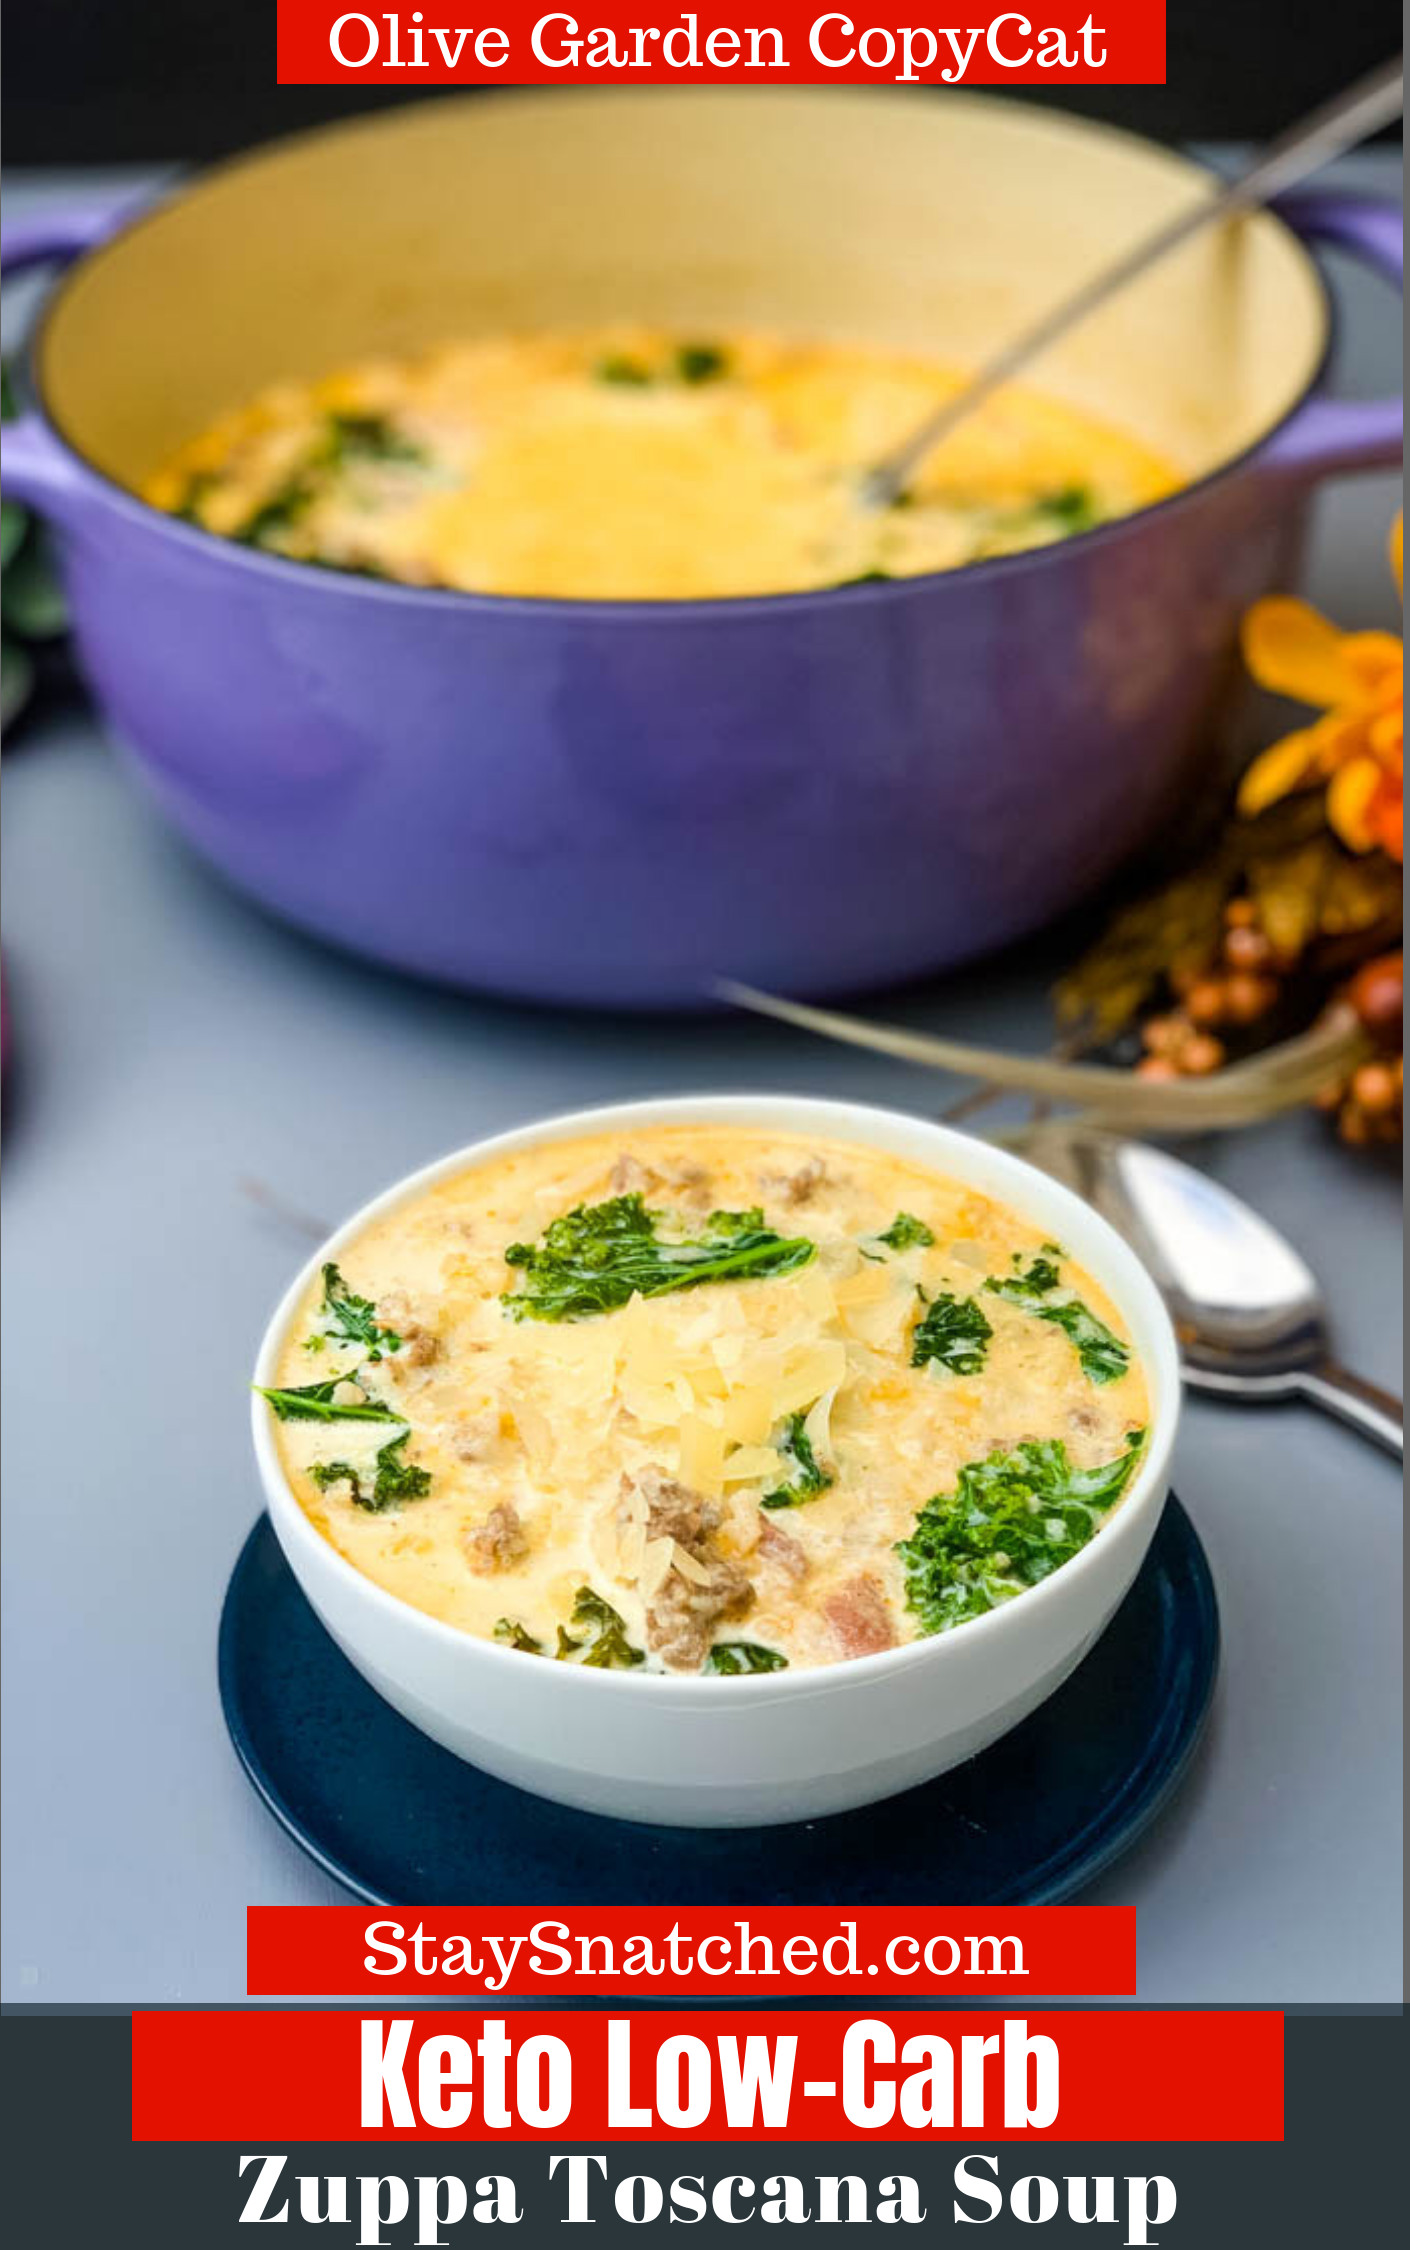 Zuppa Toscana Soup Crockpot Keto
 Easy Keto Low Carb Zuppa Toscana Soup is the best Olive